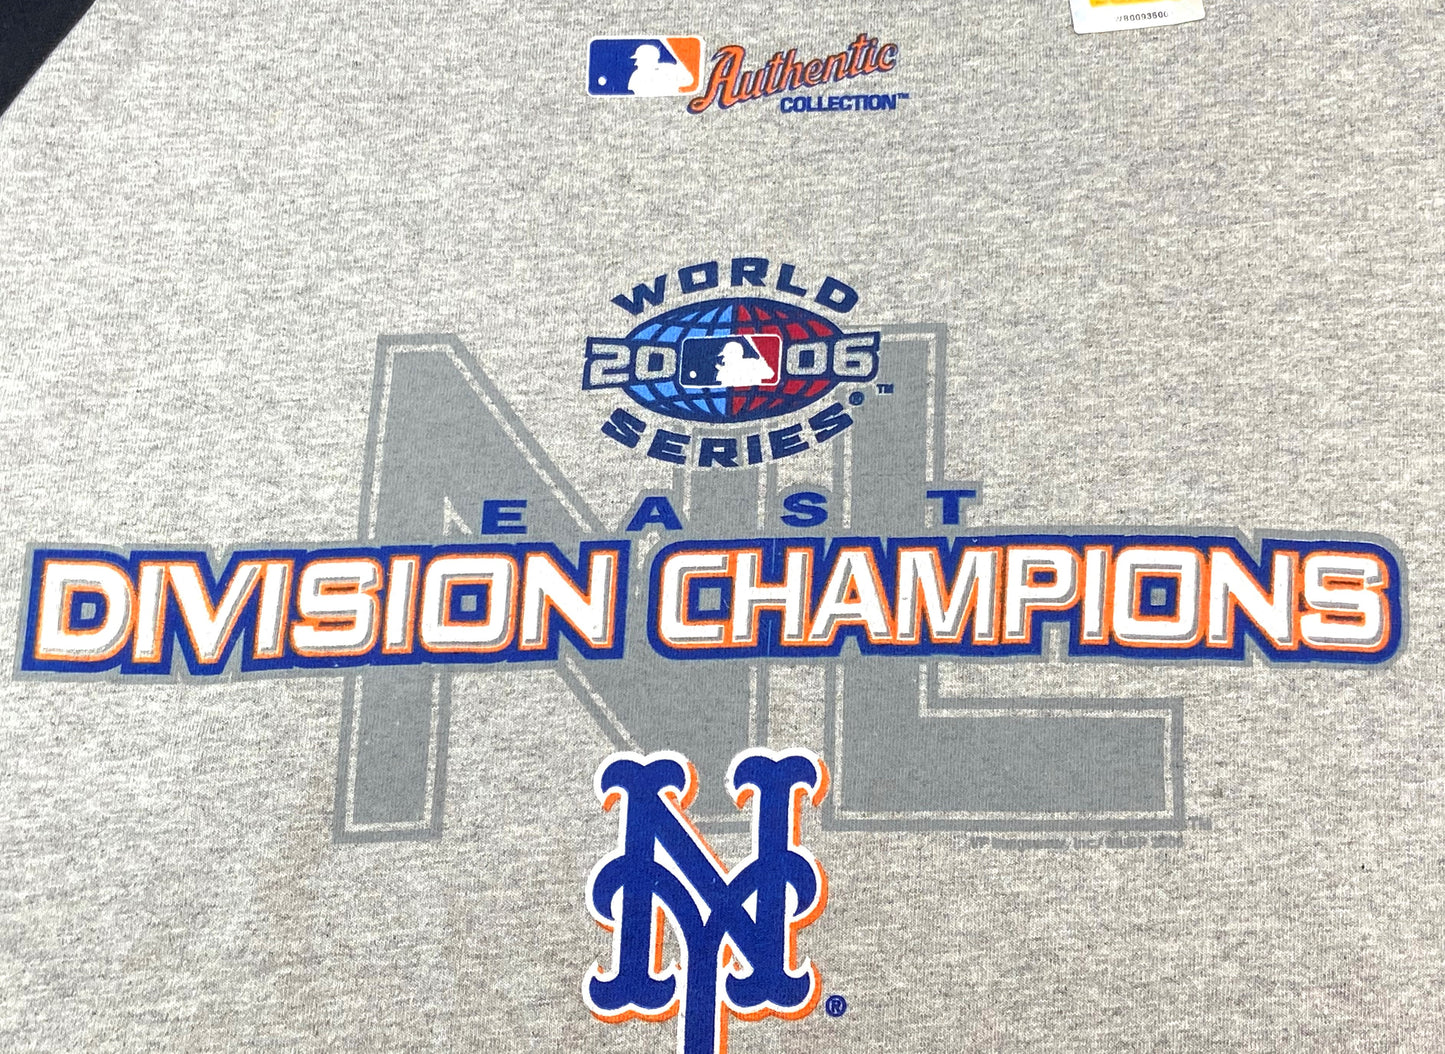 New York Mets MLB 2006 Division Champions XL T-Shirt 3/4 Sleeve By VF Imagewear